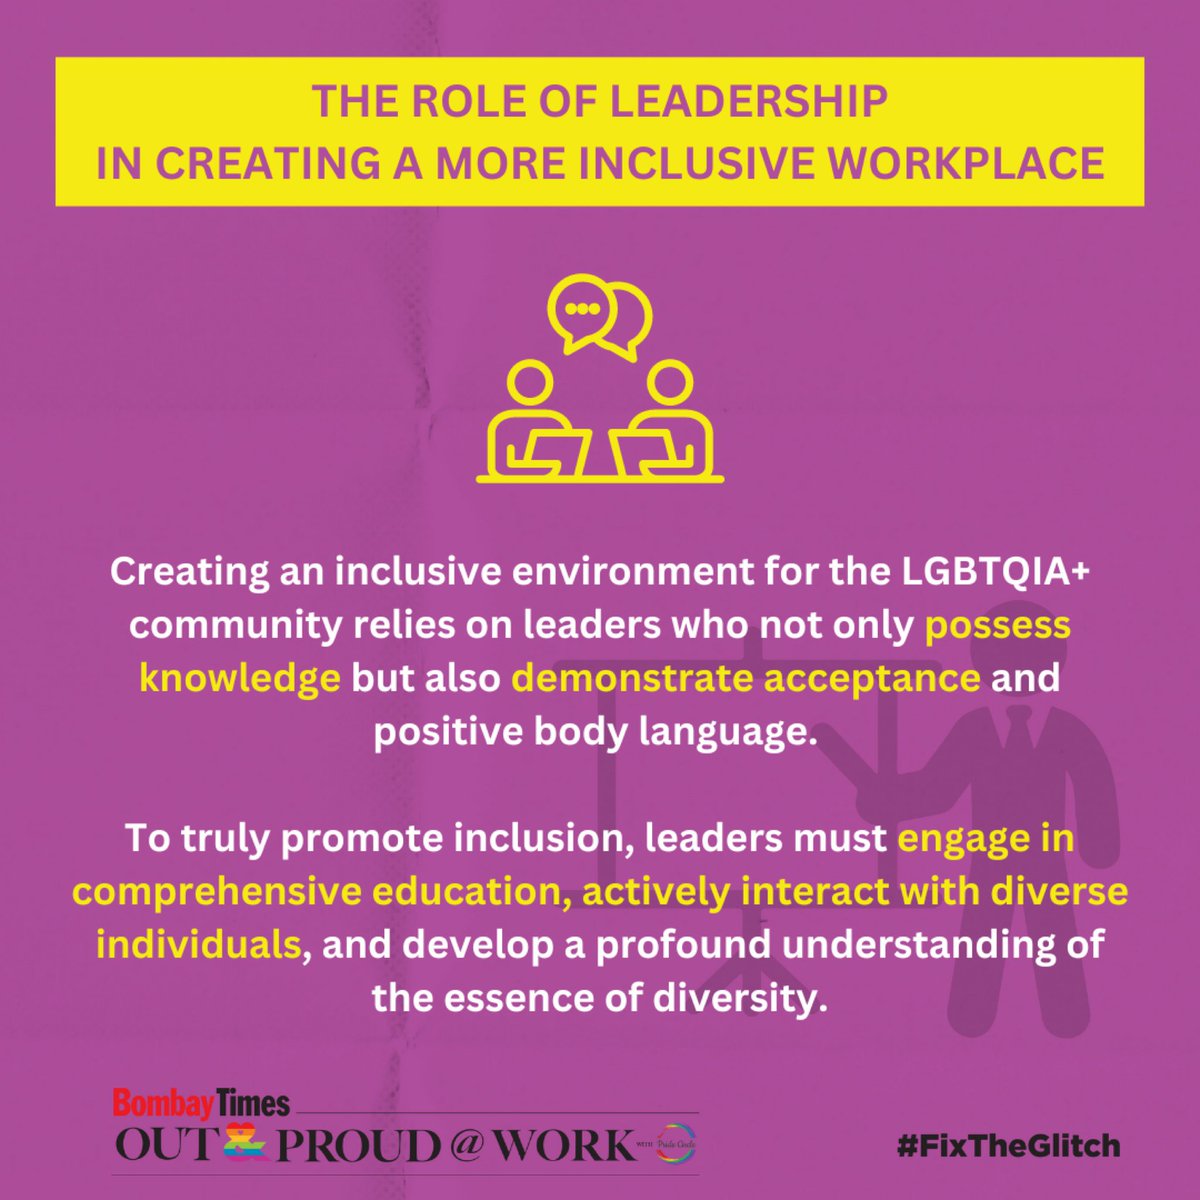 Meet Pawan Dhall, a Queer Activist, Writer, and Consultant. With a focus on leadership, education, and embracing diversity, Pawan envisions authentic and inclusive workplaces for everyone. 

Will you join him to #FixTheGlitch? Sign up today: timesoutandproud.com/#take-my-pledge